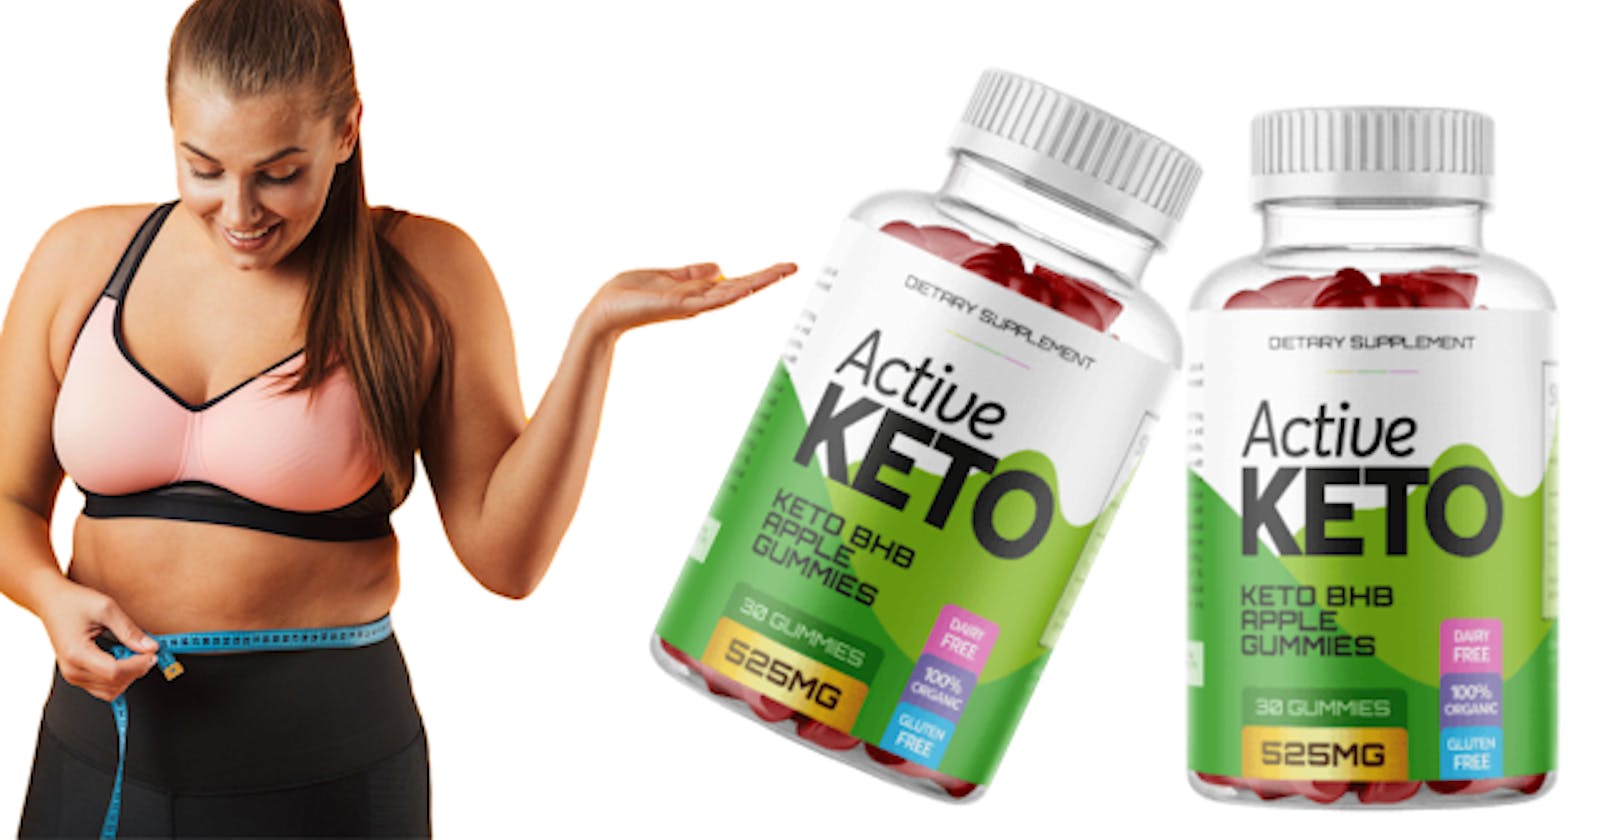 Slim DNA Keto Gummies: Reviews, Side Effects & Where To Buy? Must Read!